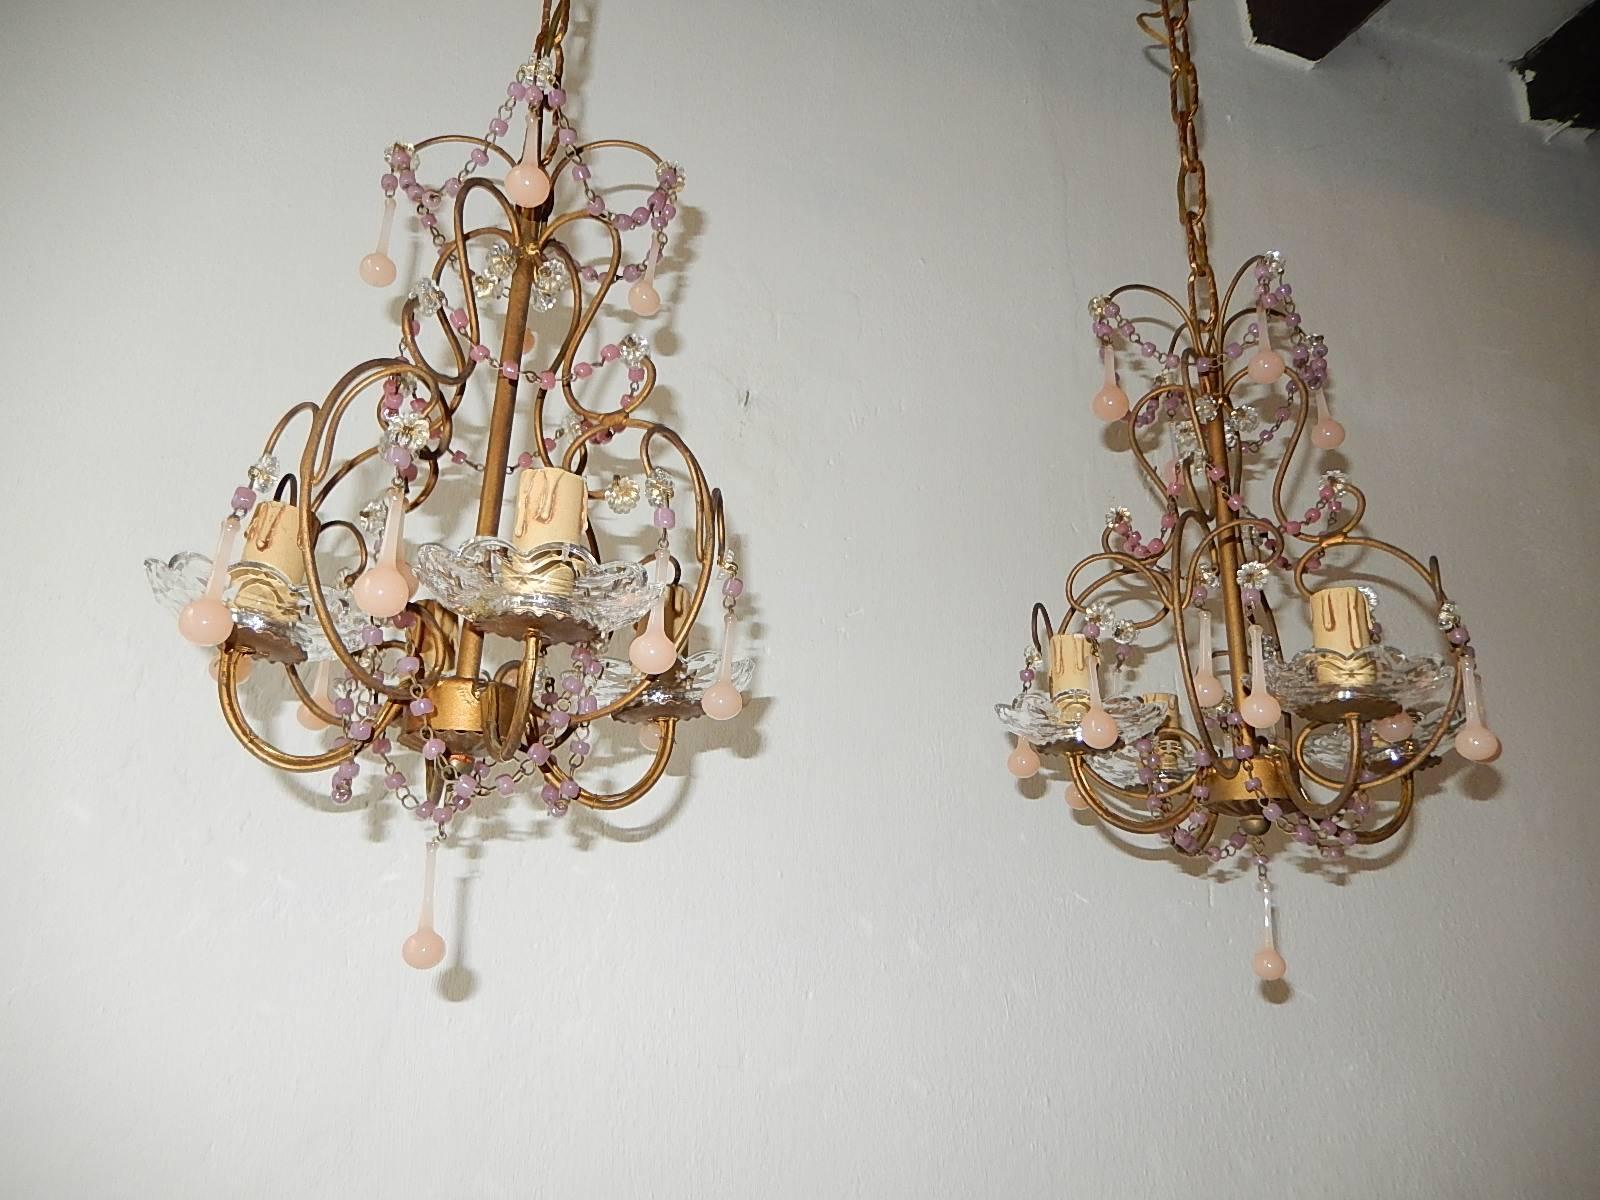 Beautiful rare chandeliers, circa 1920. Chandelier housing four lights sitting in crystal bobeches. Rewired and ready to hang! Gold gilt metal. Macaroni swags of opaline beads. Adorning small pink opaline drops, not missing one. Adding 12 inches of